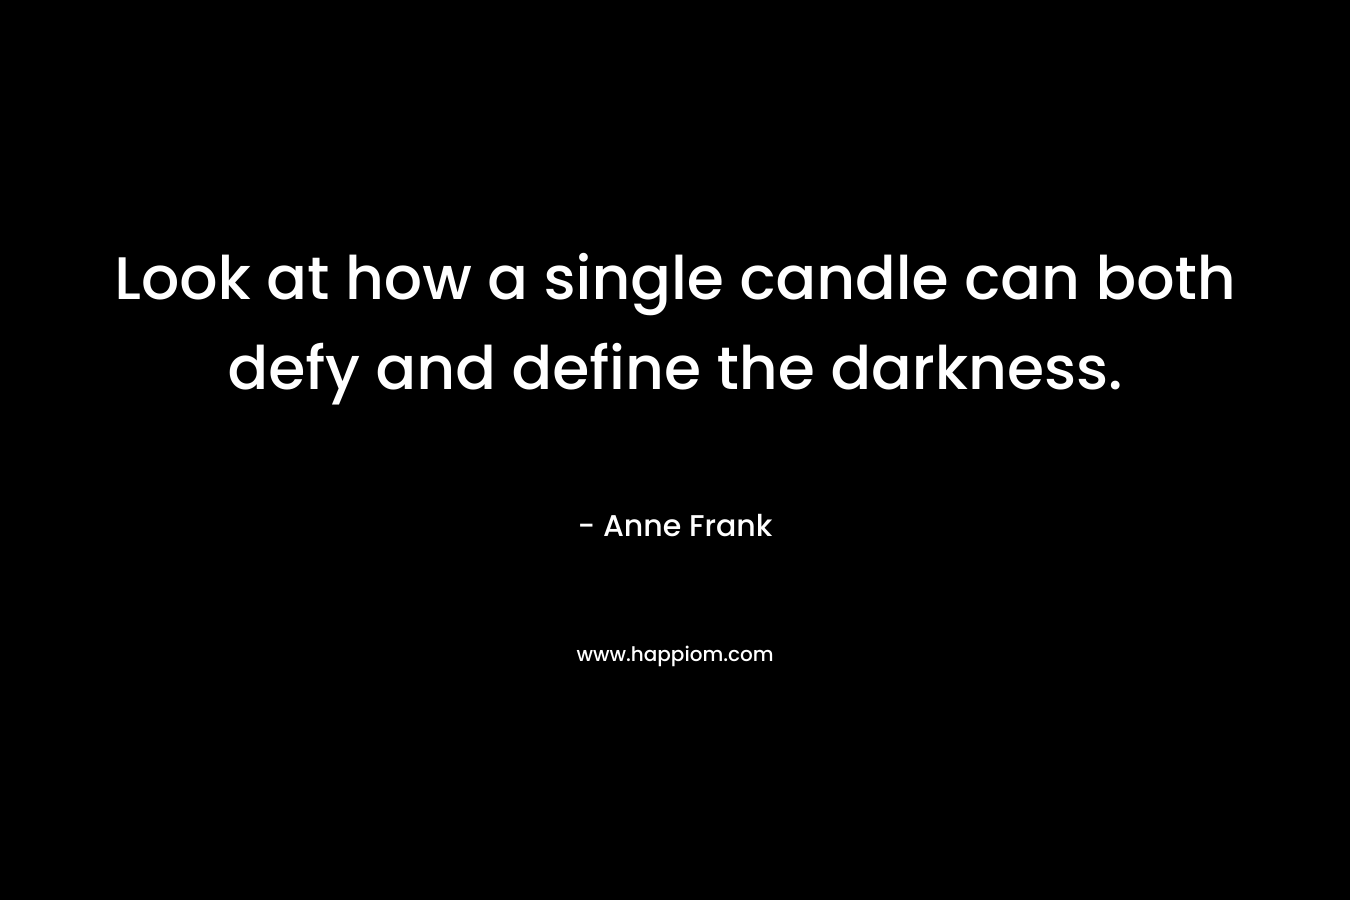 Look at how a single candle can both defy and define the darkness. – Anne Frank